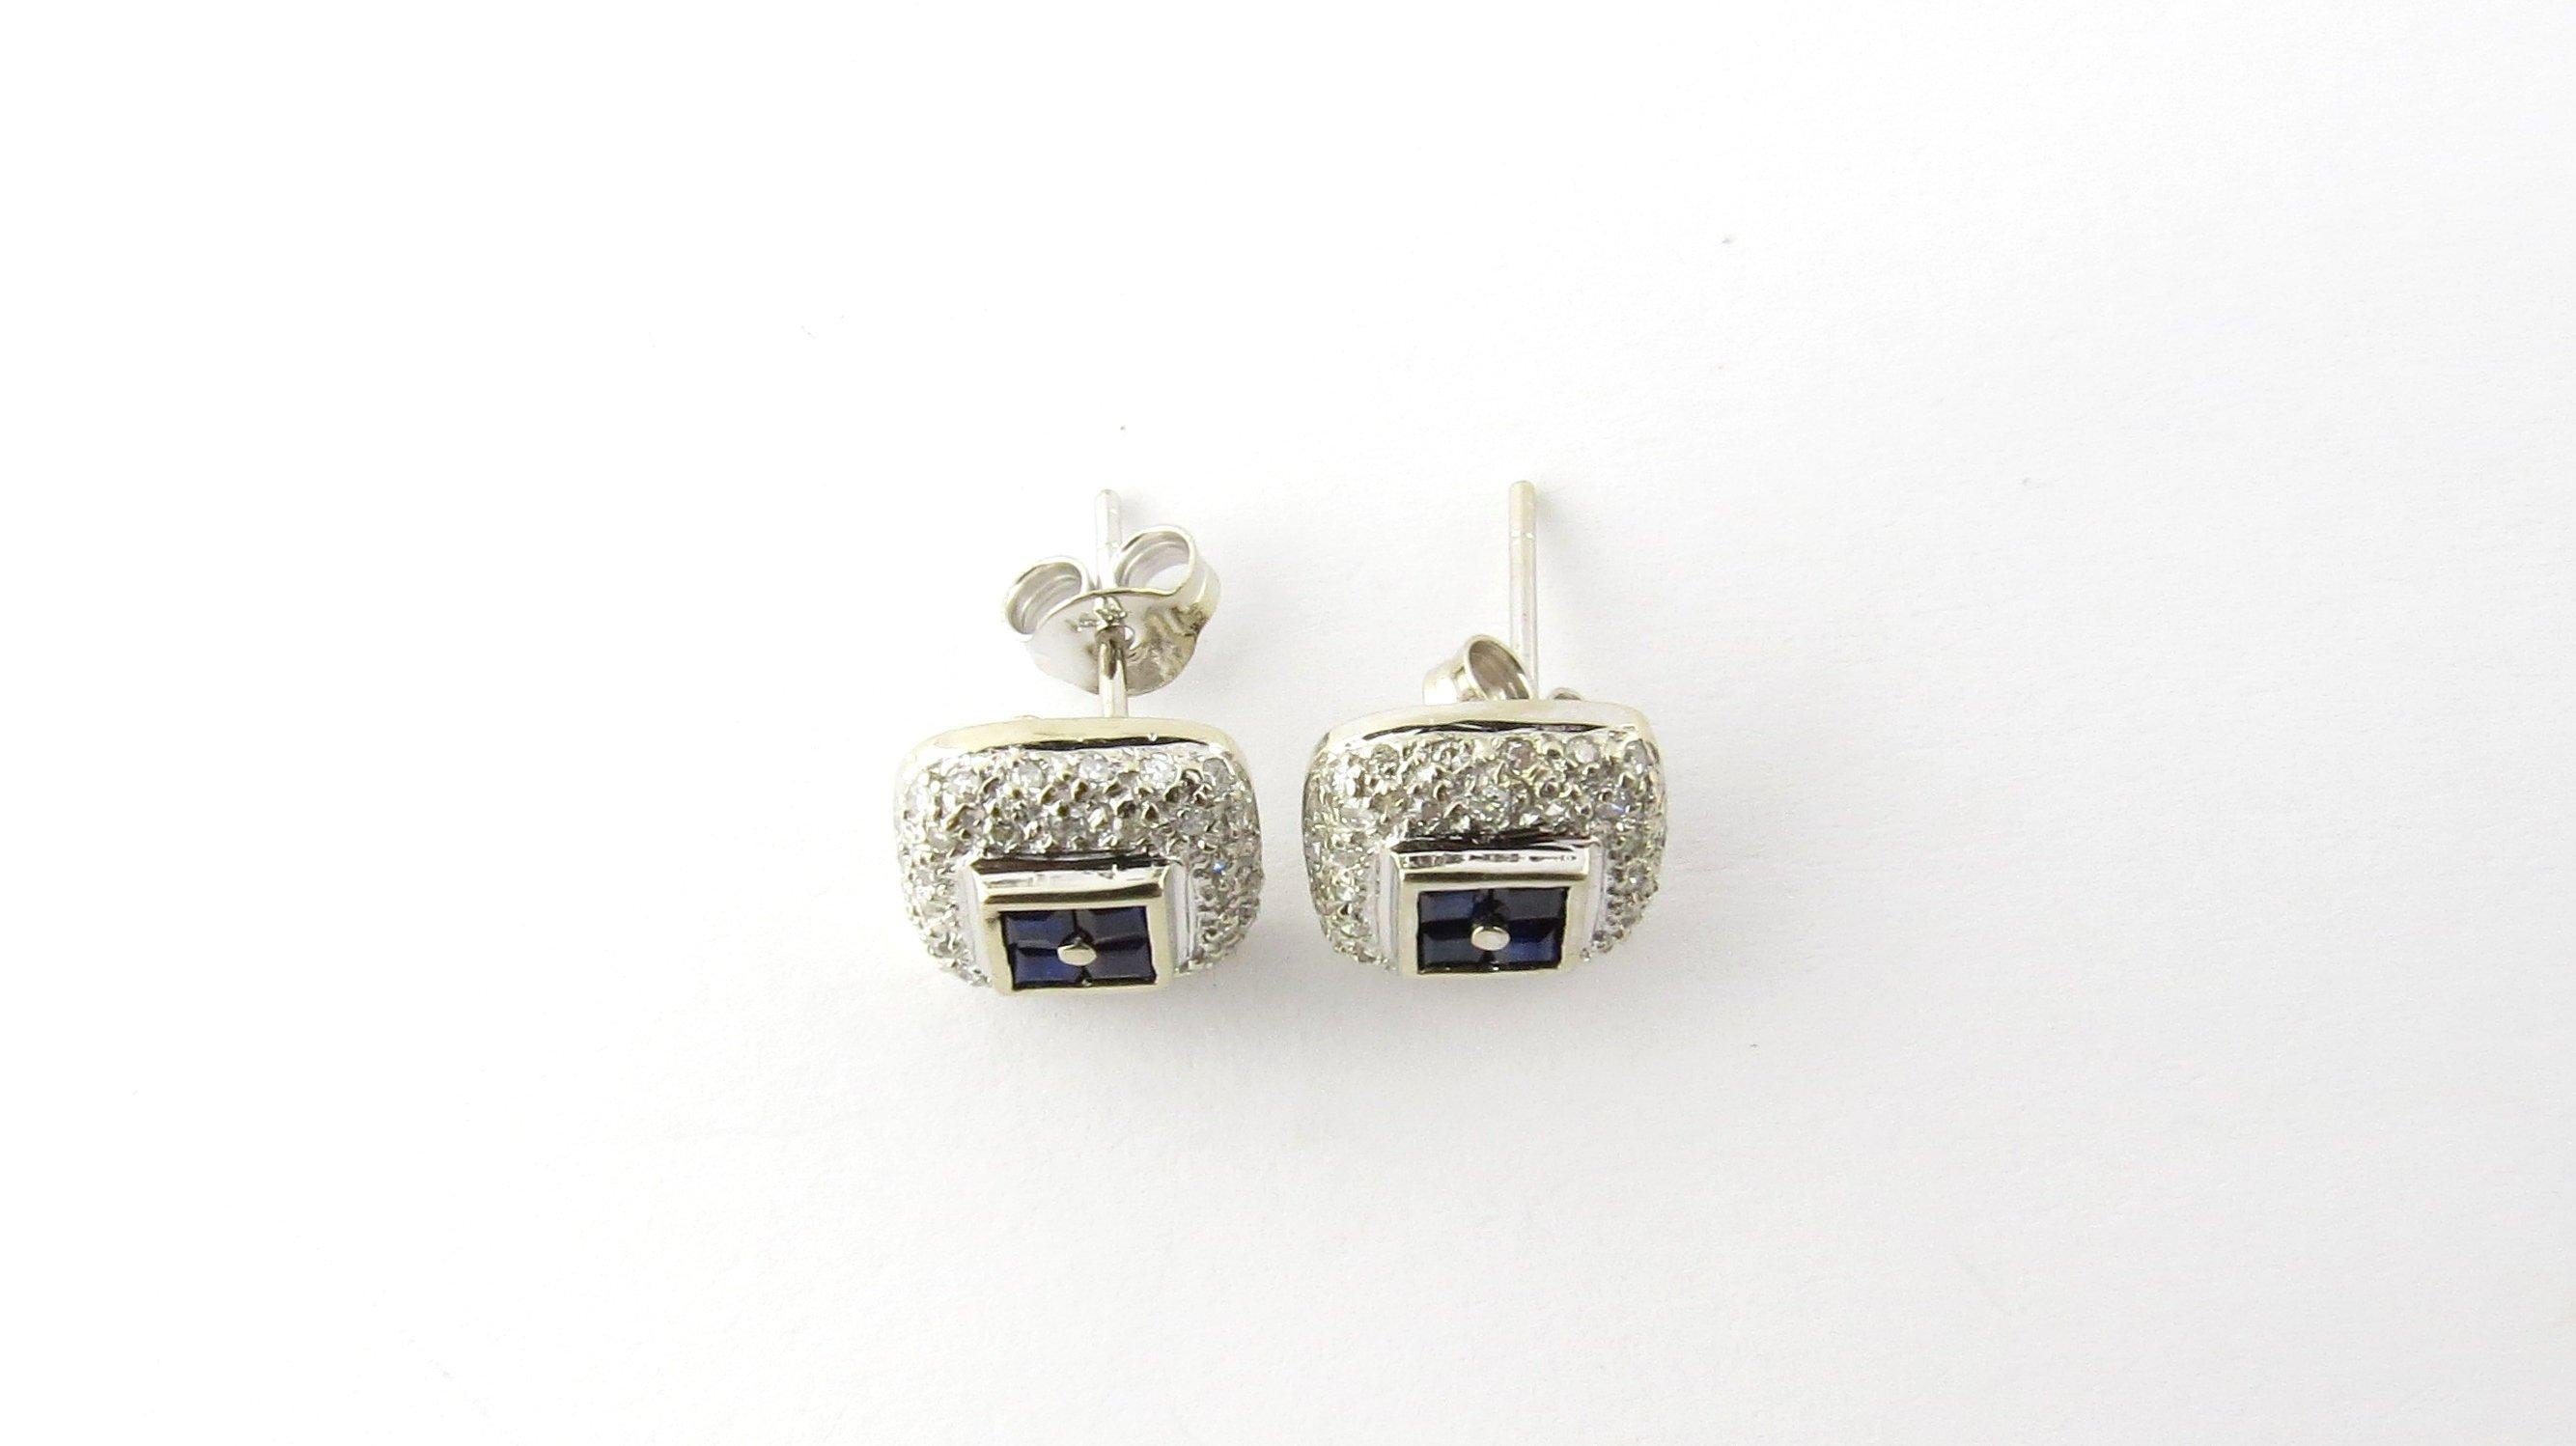 Vintage 14 Karat White Gold Sapphire and Diamond Earrings-

These sparkling earrings each feature four princess cut genuine sapphires surrounded by 36 round single-cut diamonds. Beautifully detailed in 14K white gold. Push back